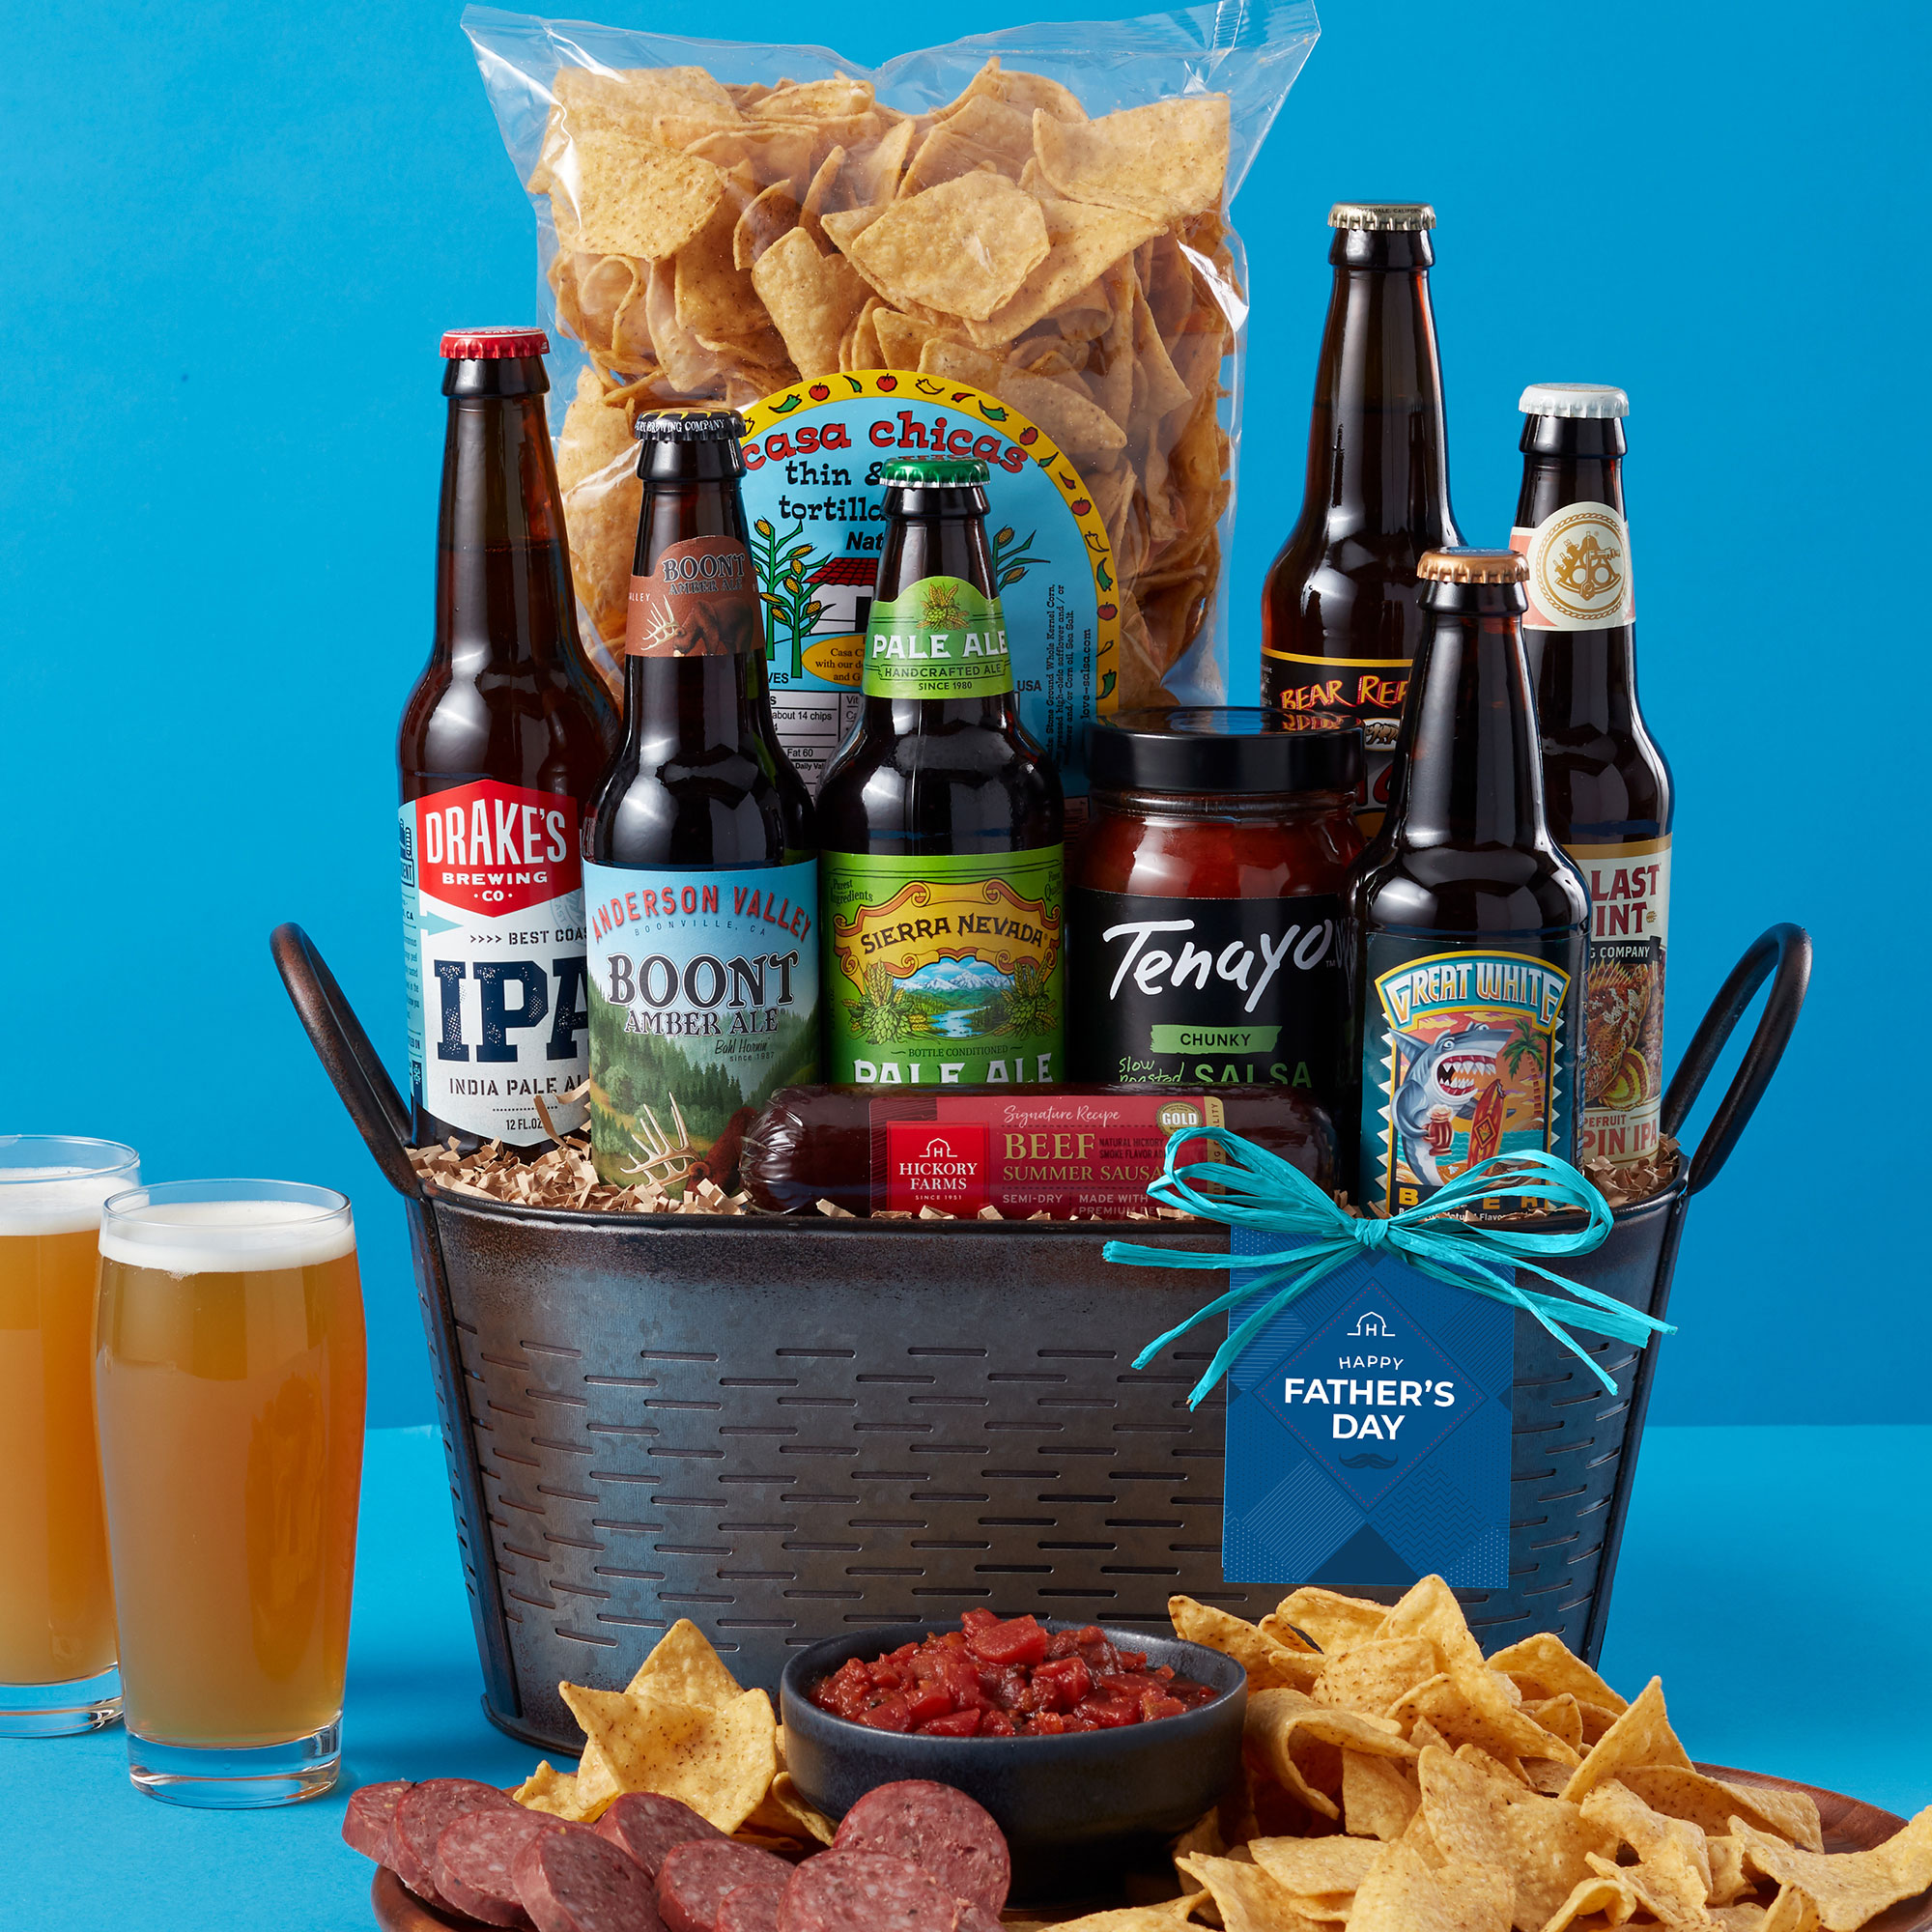 https://www.hickoryfarms.com/on/demandware.static/-/Sites-Web-Master-Catalog/default/dwd7937986/images/products/fathers-day-california-craft-beer-gift-basket-004569-1.jpg